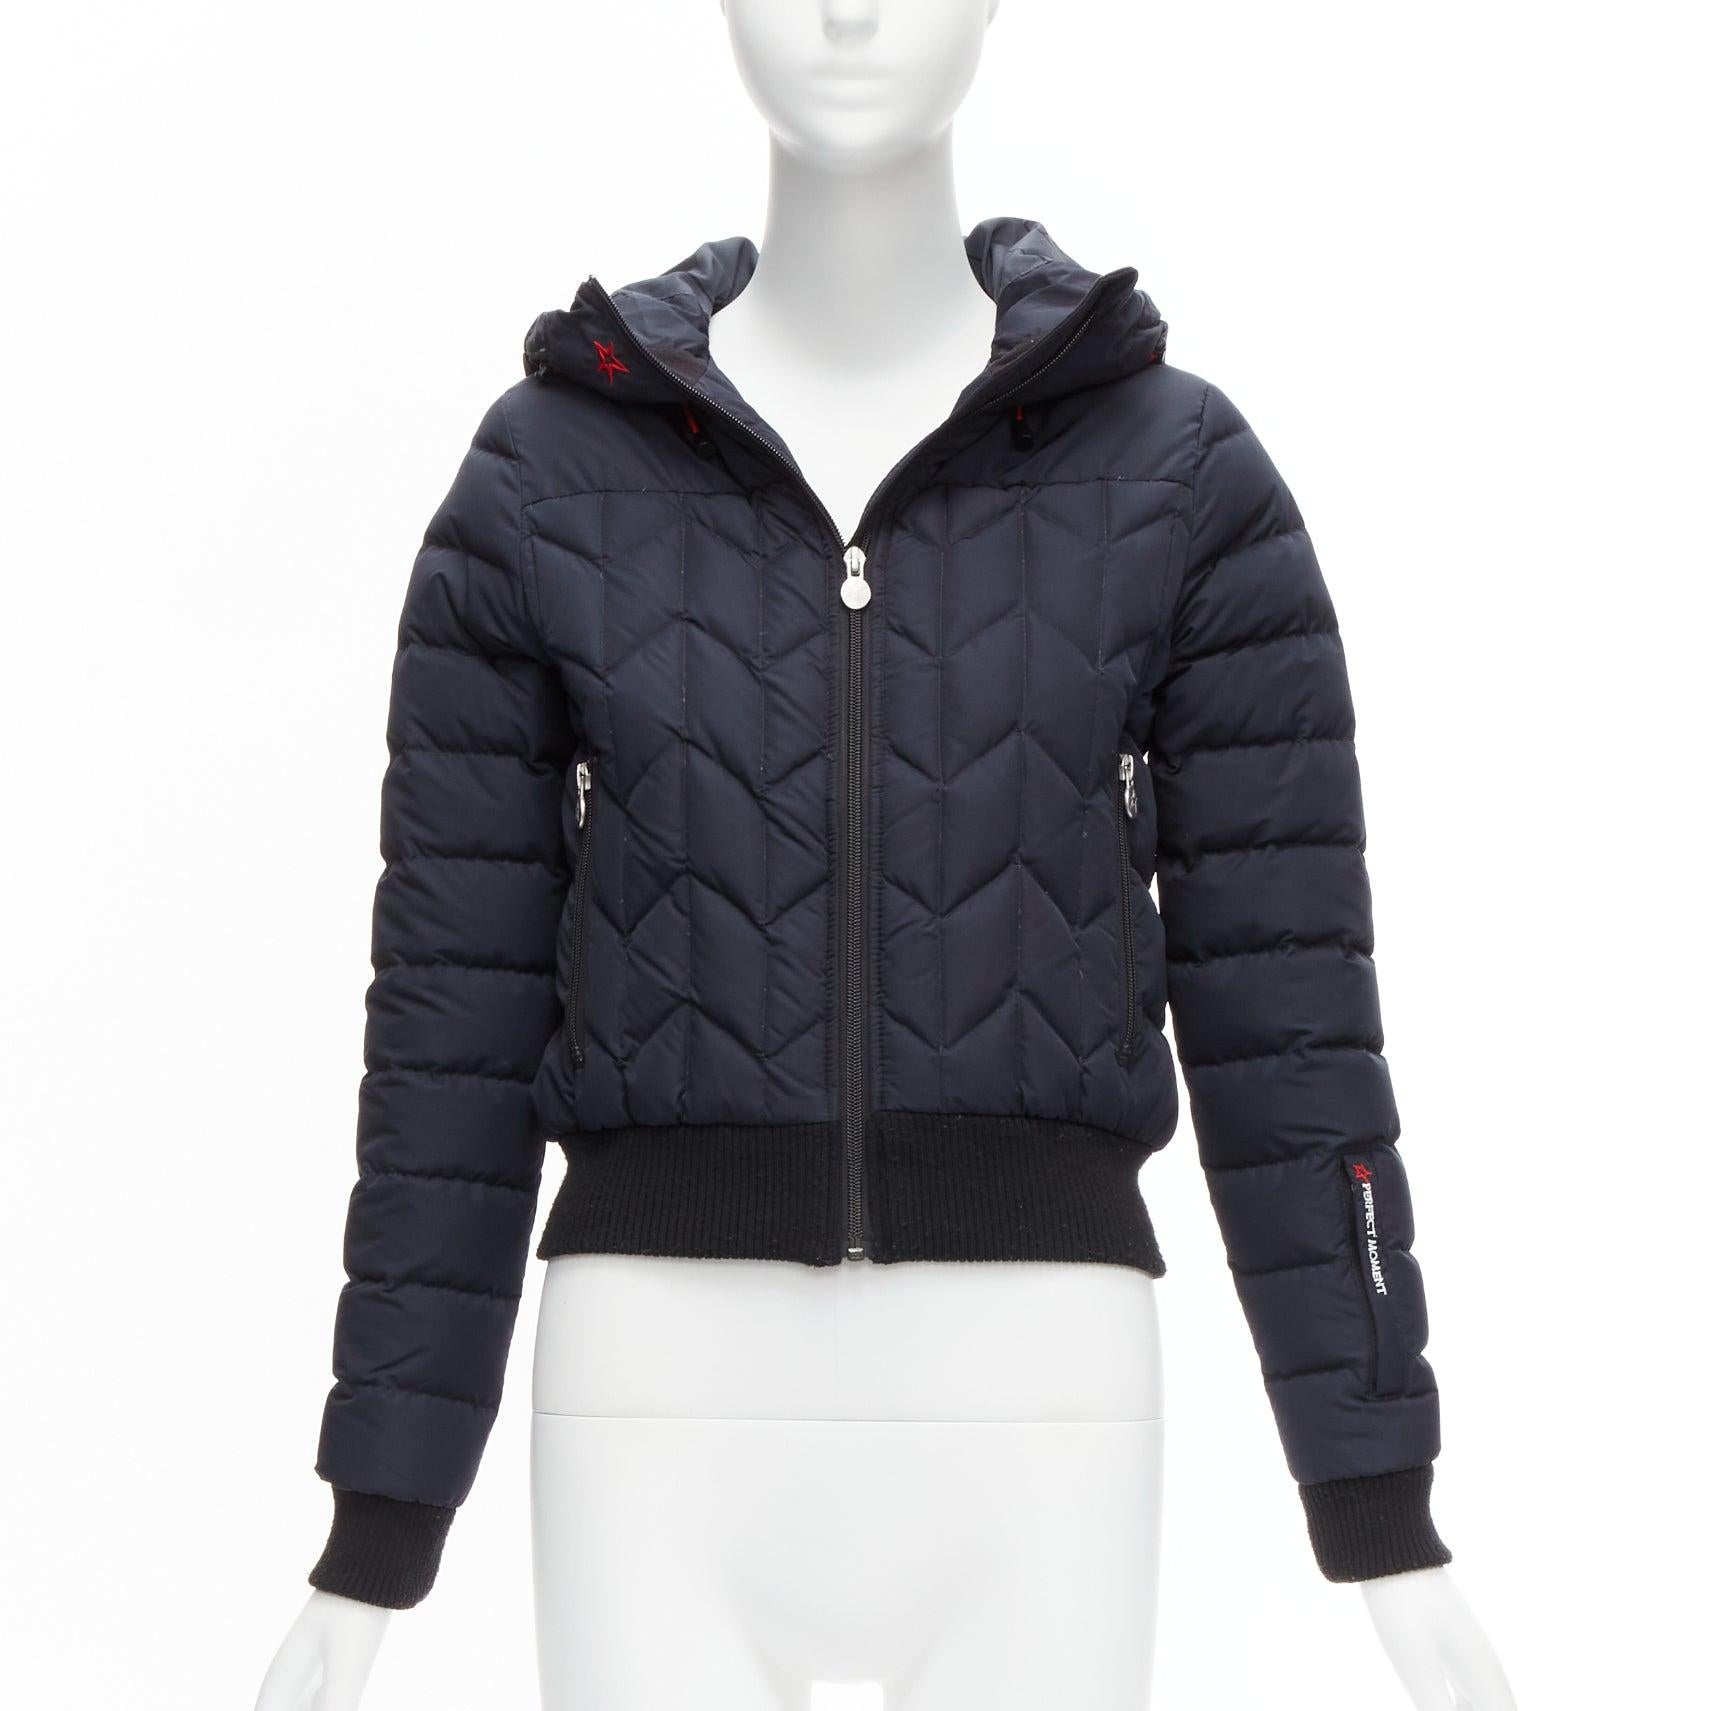 PERFECT MOMENT red logo navy blue chevron quilted hooded puffer jacket XS
Reference: SNKO/A00264
Brand: Perfect moment
Material: Nylon
Color: Navy, Red
Pattern: Solid
Closure: Zip
Lining: Black Fabric
Extra Details: Front zip closure. Inside pockets